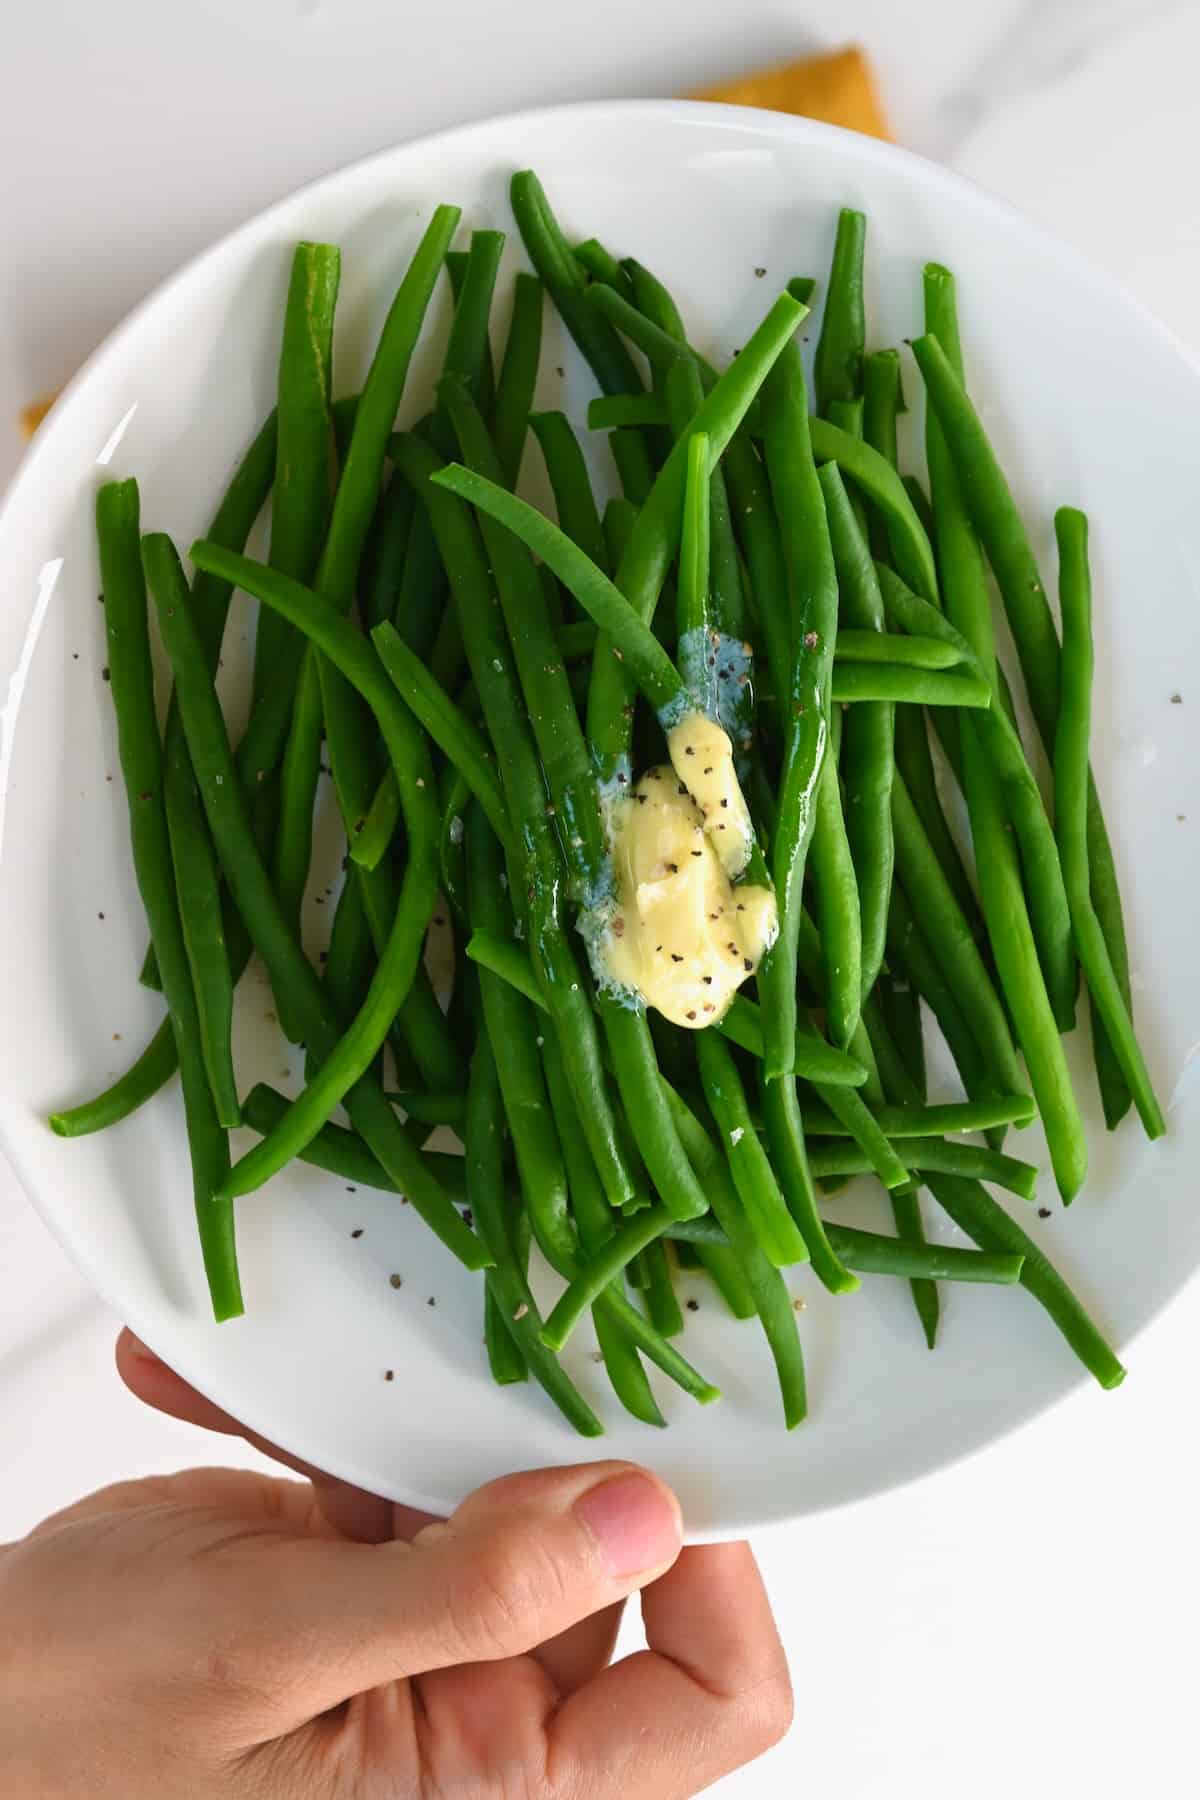 Boiled green beans topped with butter salt and pepper